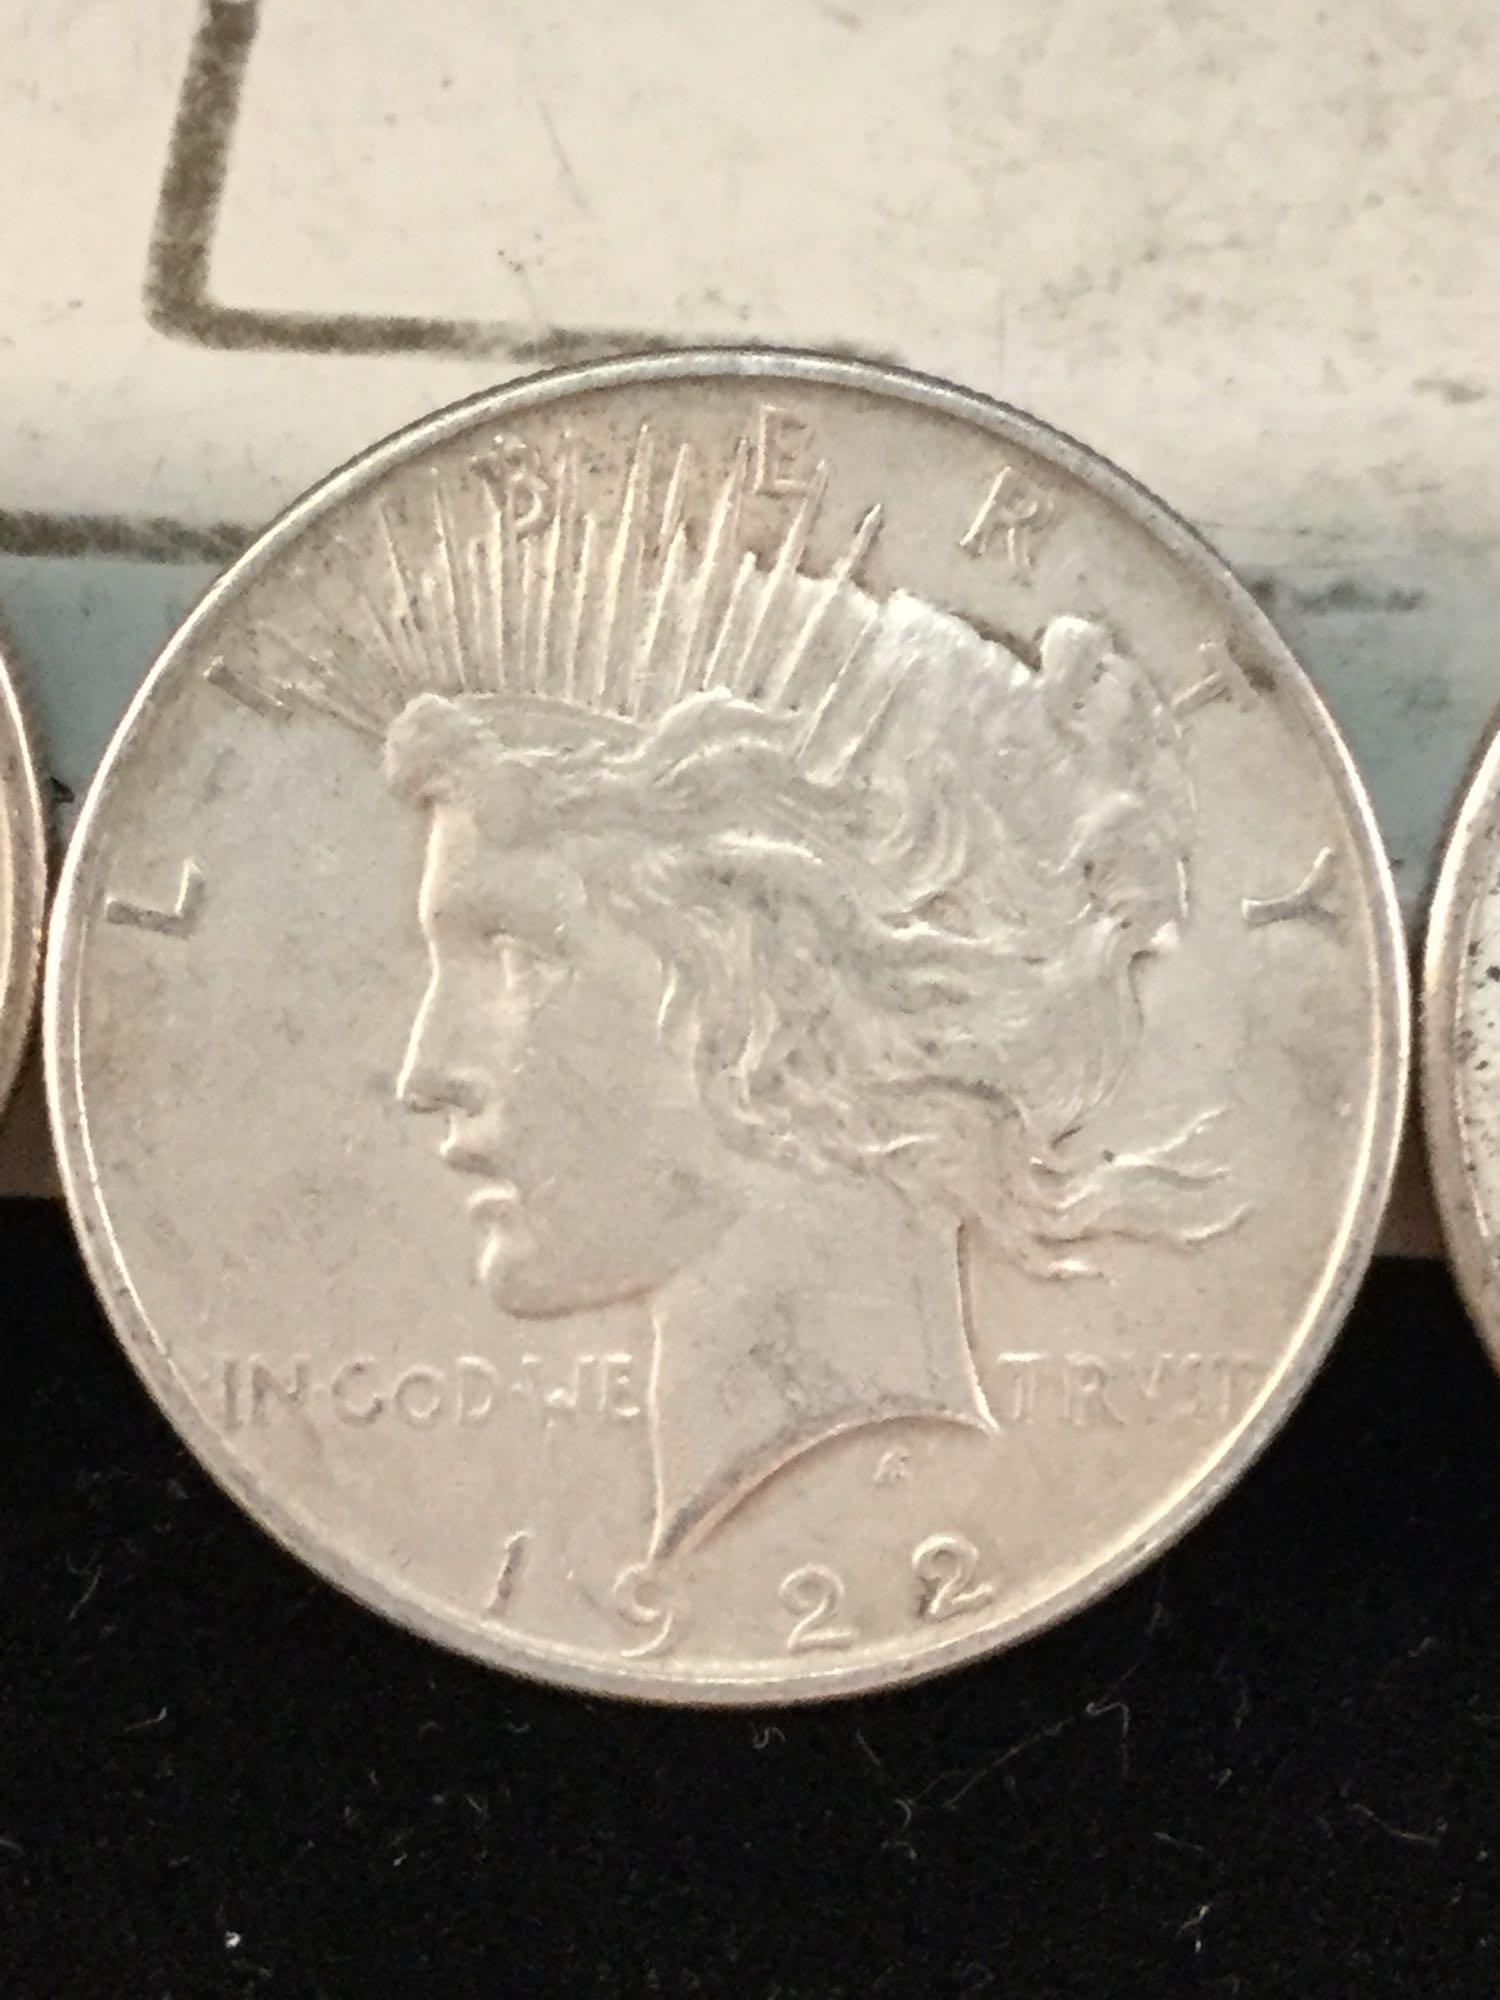 2 1922, a 1923, and a 1926 silver Peace dollars, 4 coins total